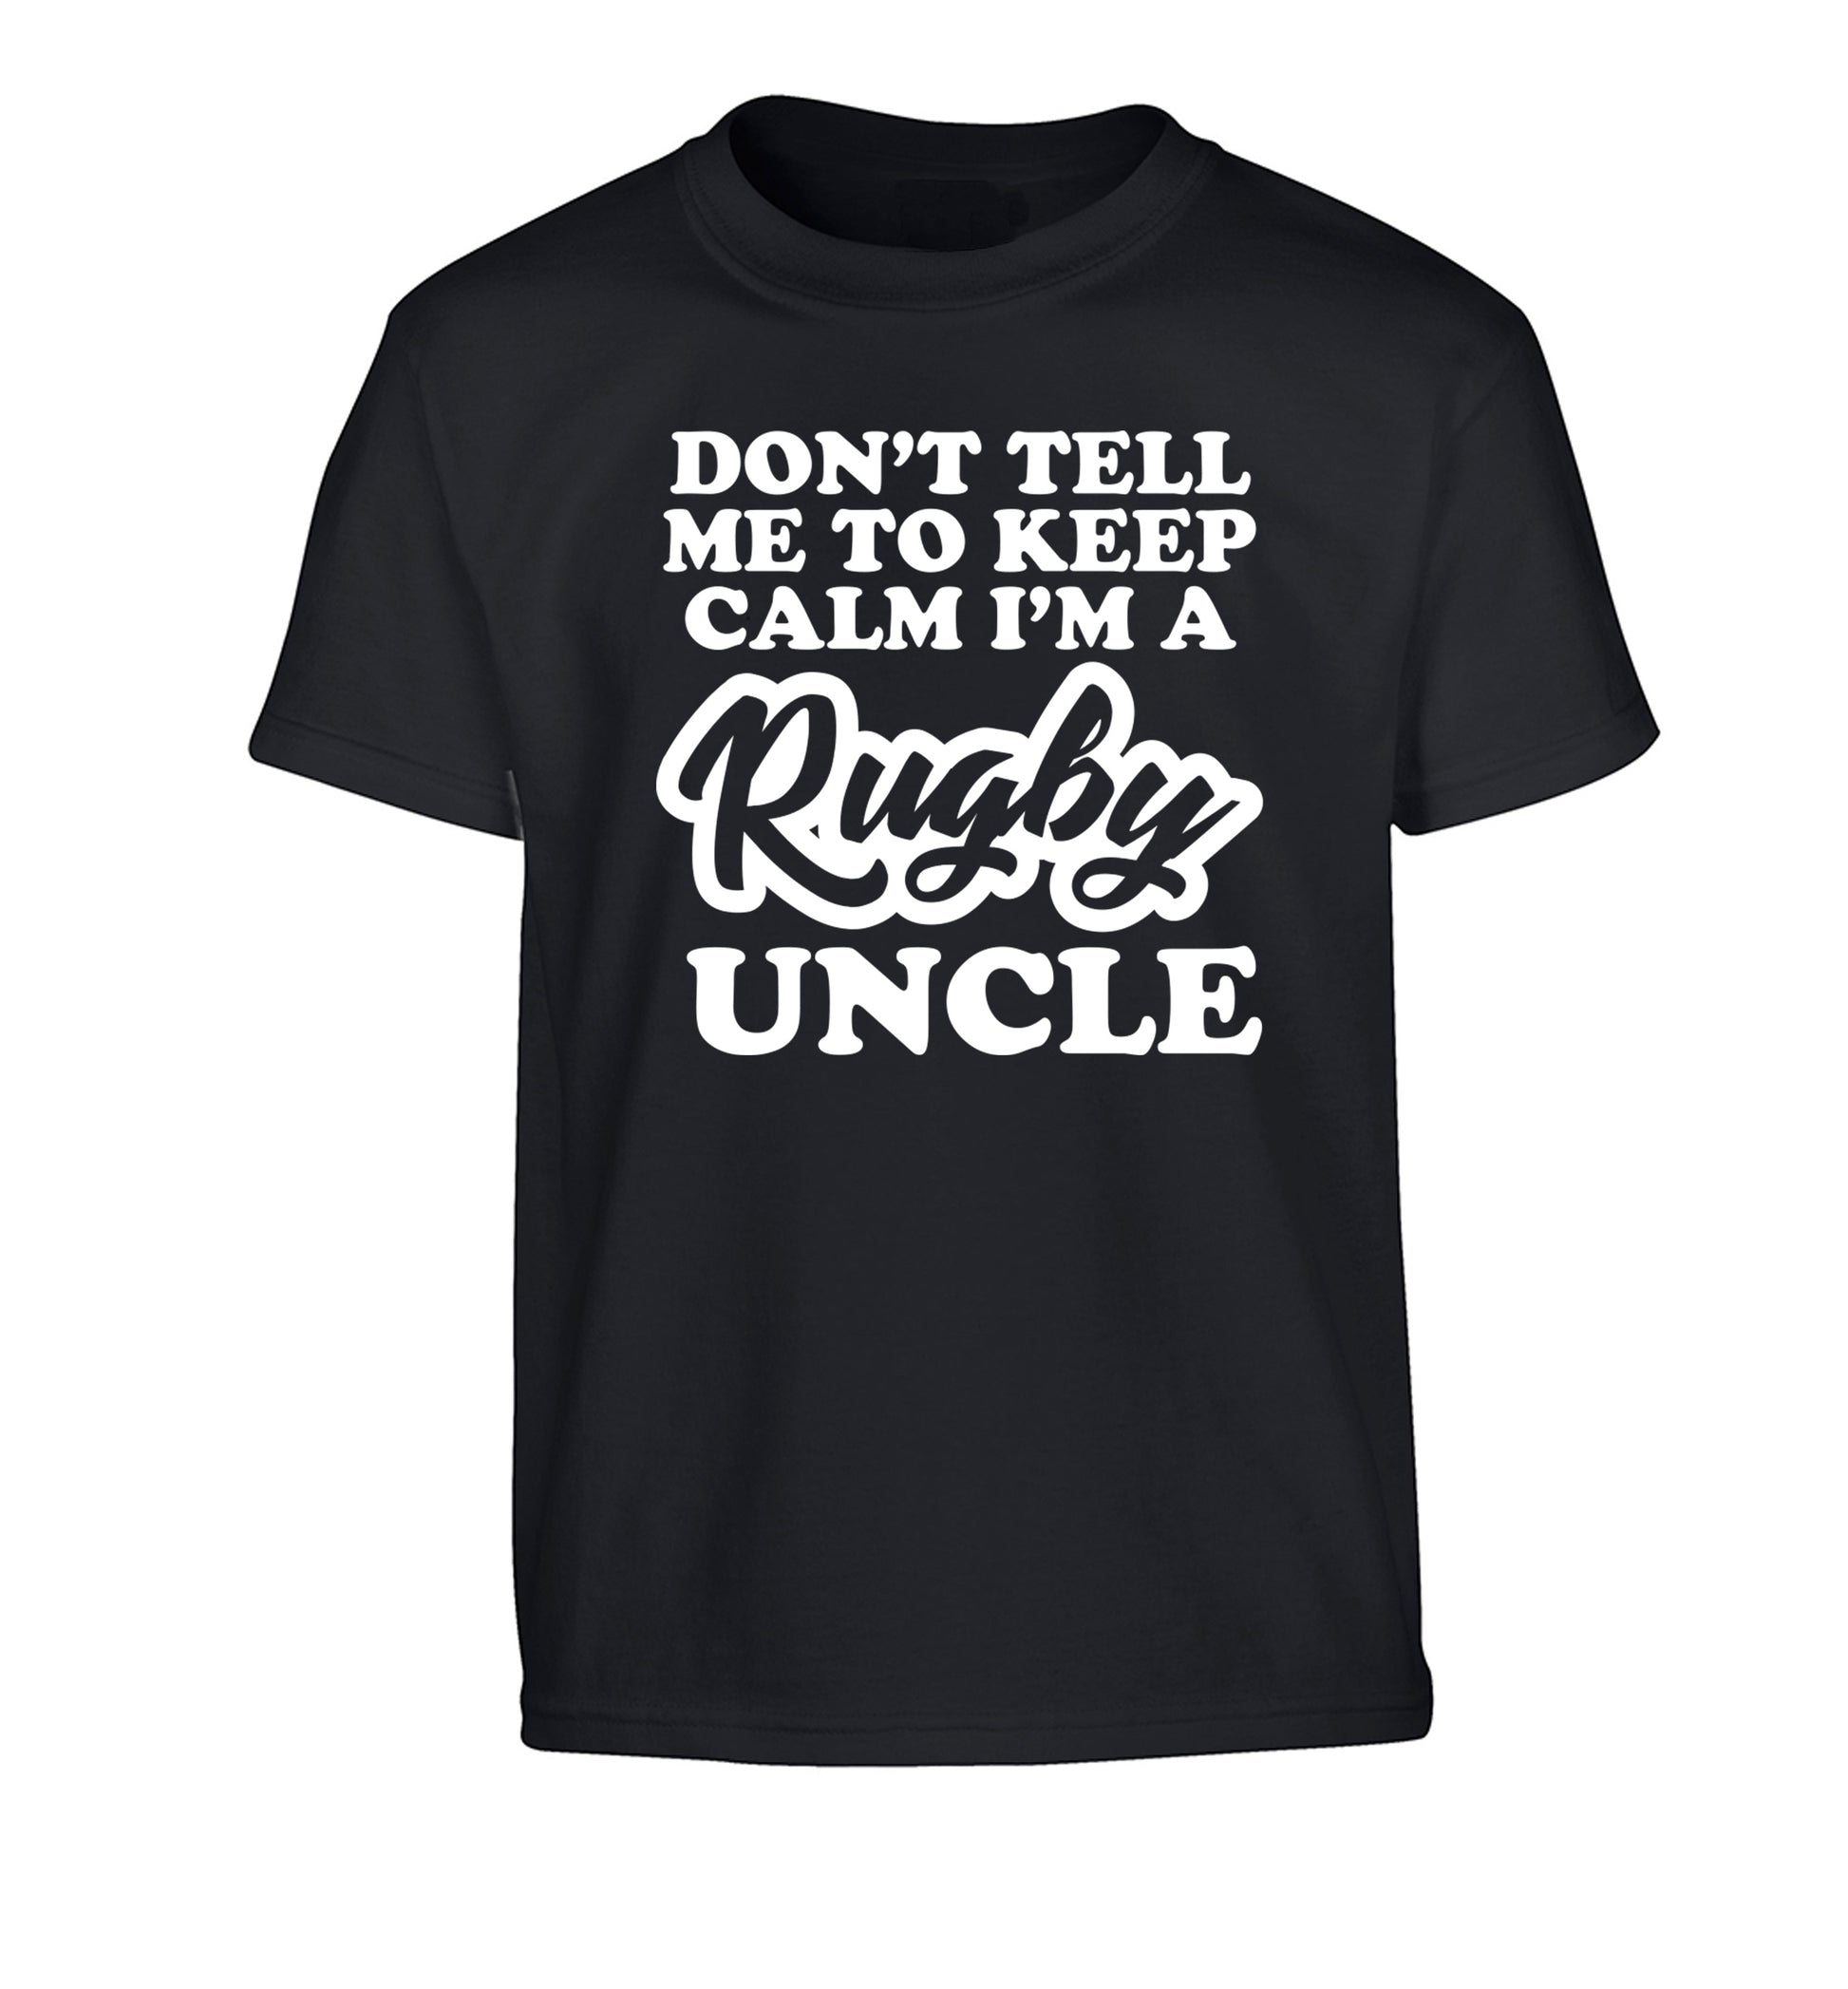 Don't tell me to keep calm I'm a rugby uncle Children's black Tshirt 12-13 Years